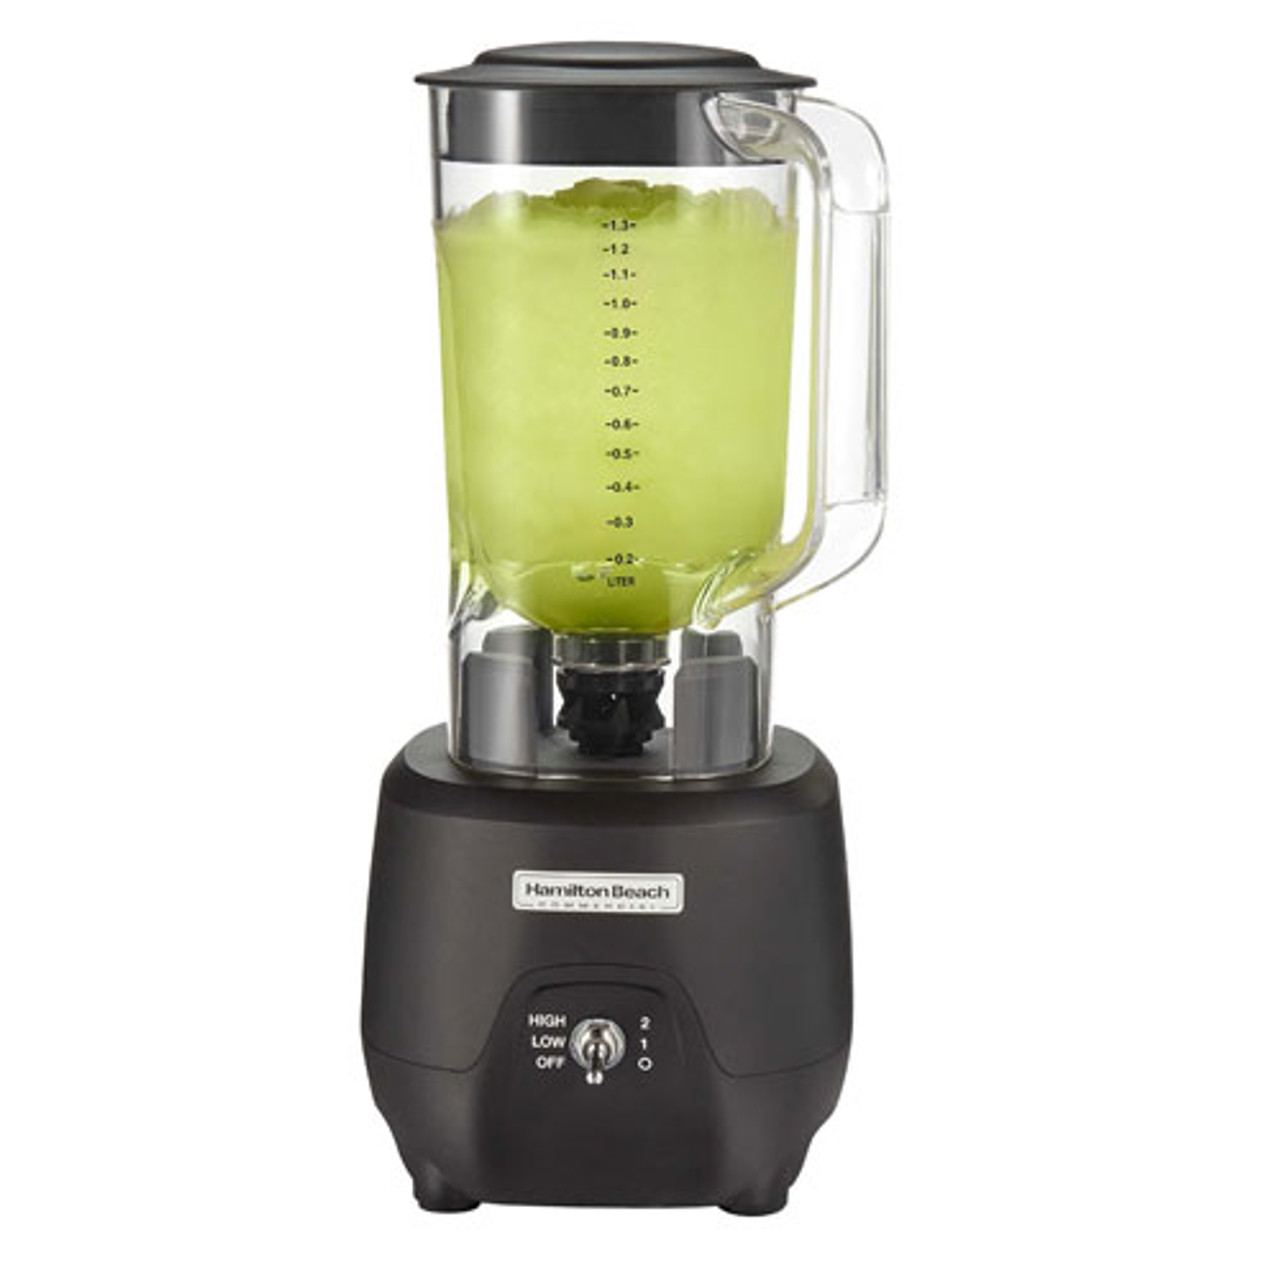  Hamilton Beach Blender and Food Processor Combo With